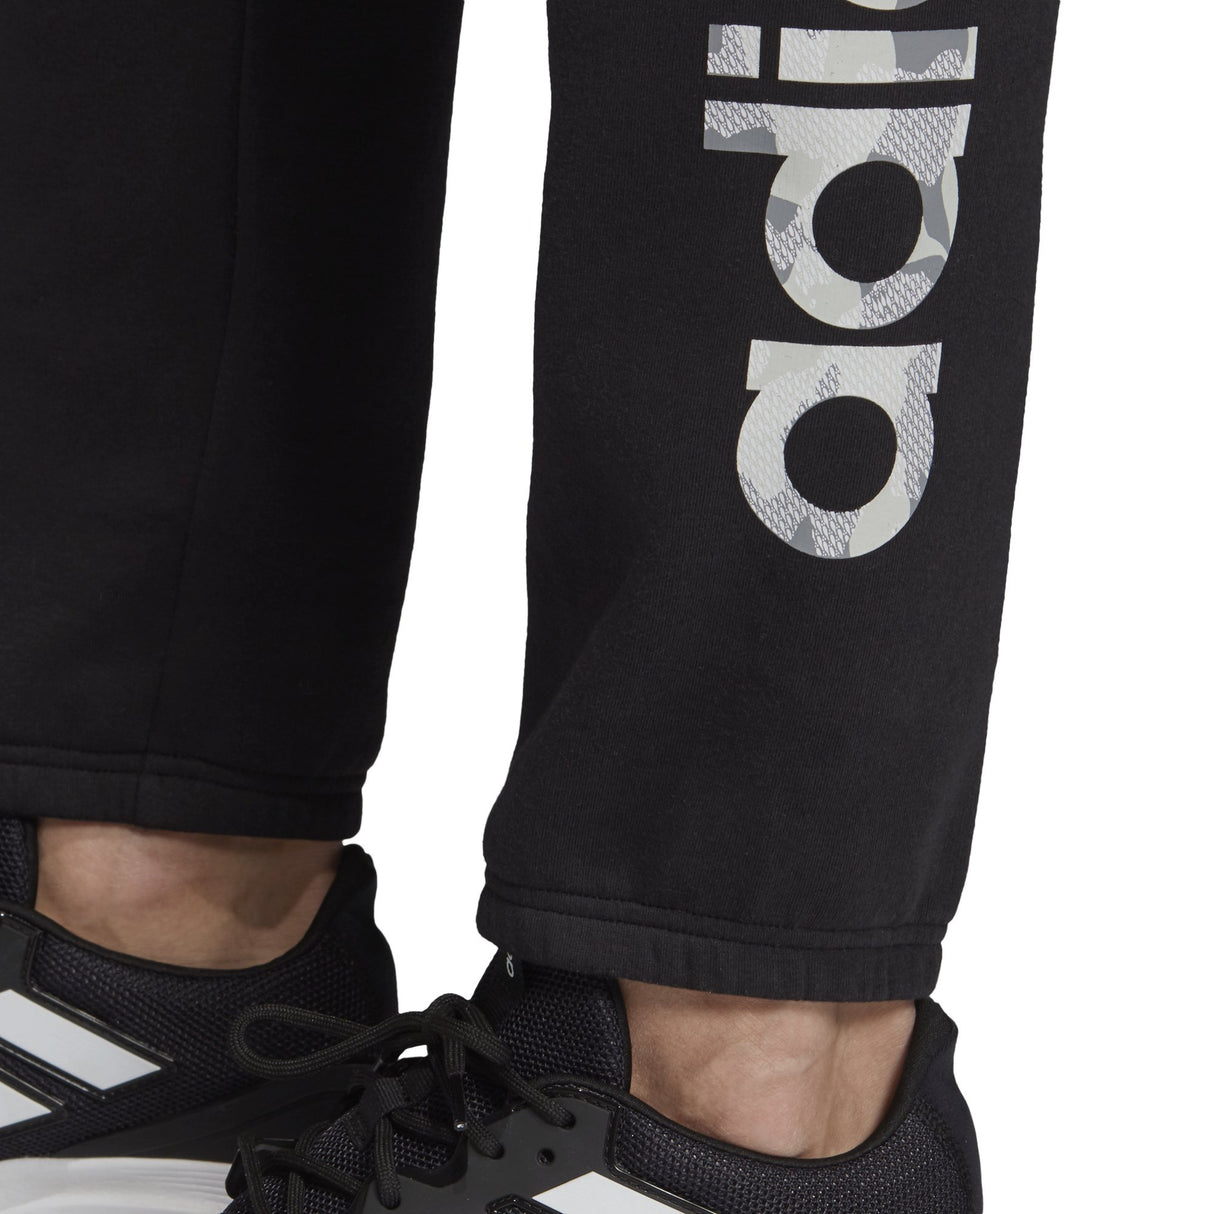 ADIDAS MENS COMMERCIAL PACK PANT